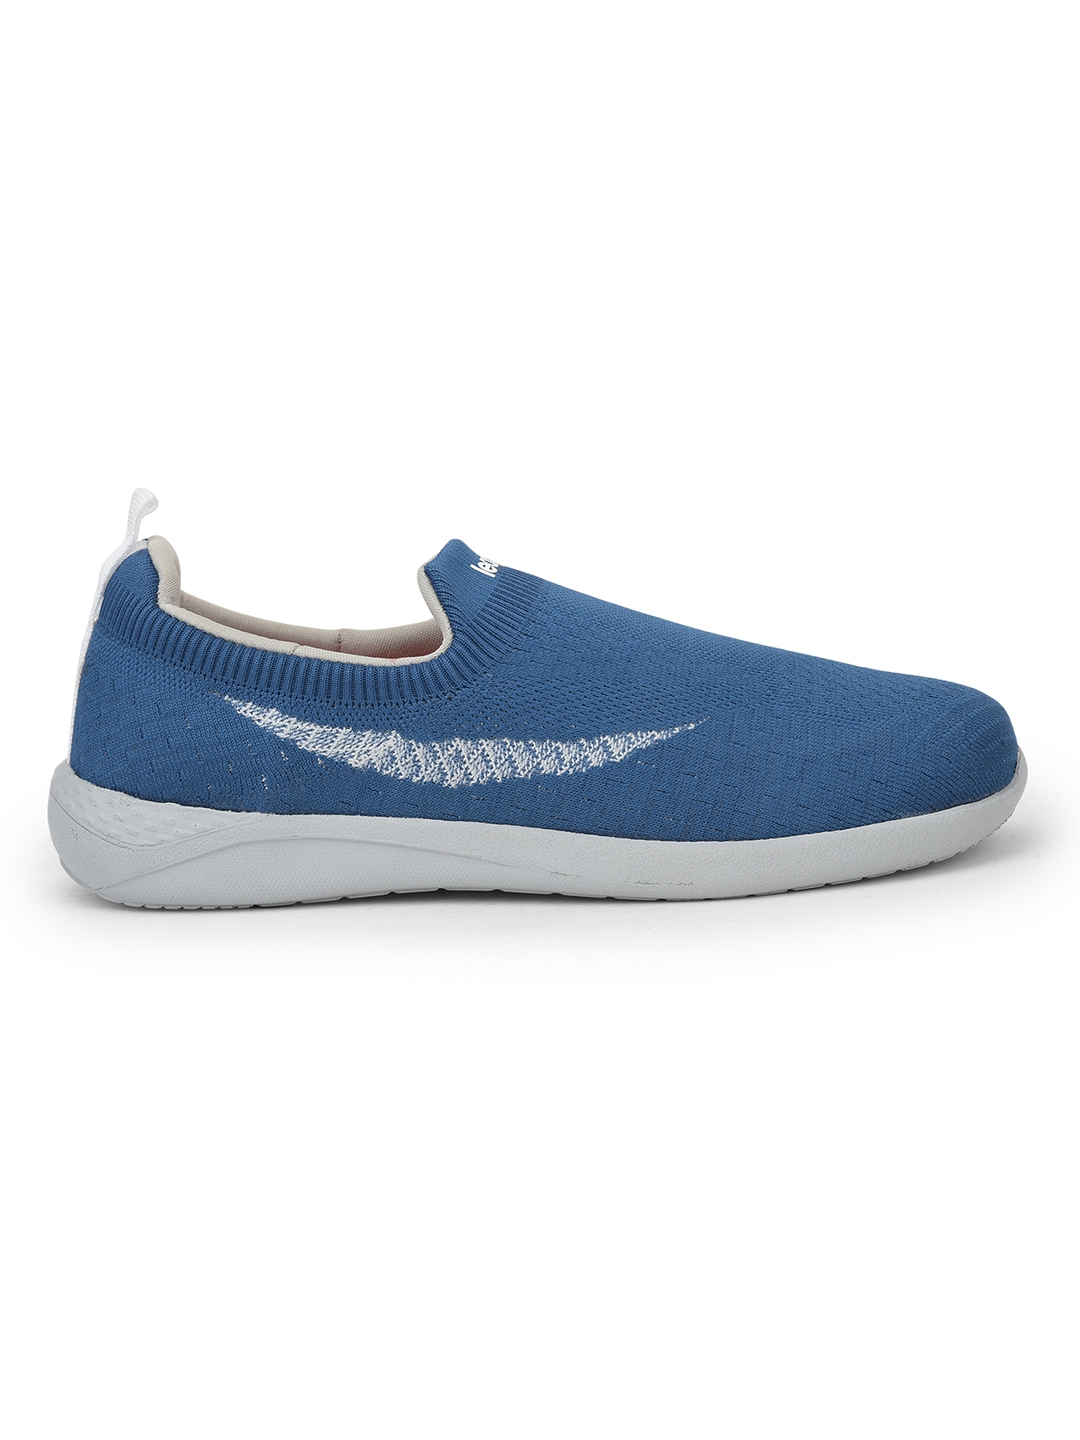 Liberty | LEAP7X by Liberty S.BLUE Sports Shoes RORY-10 1499 For :- Men